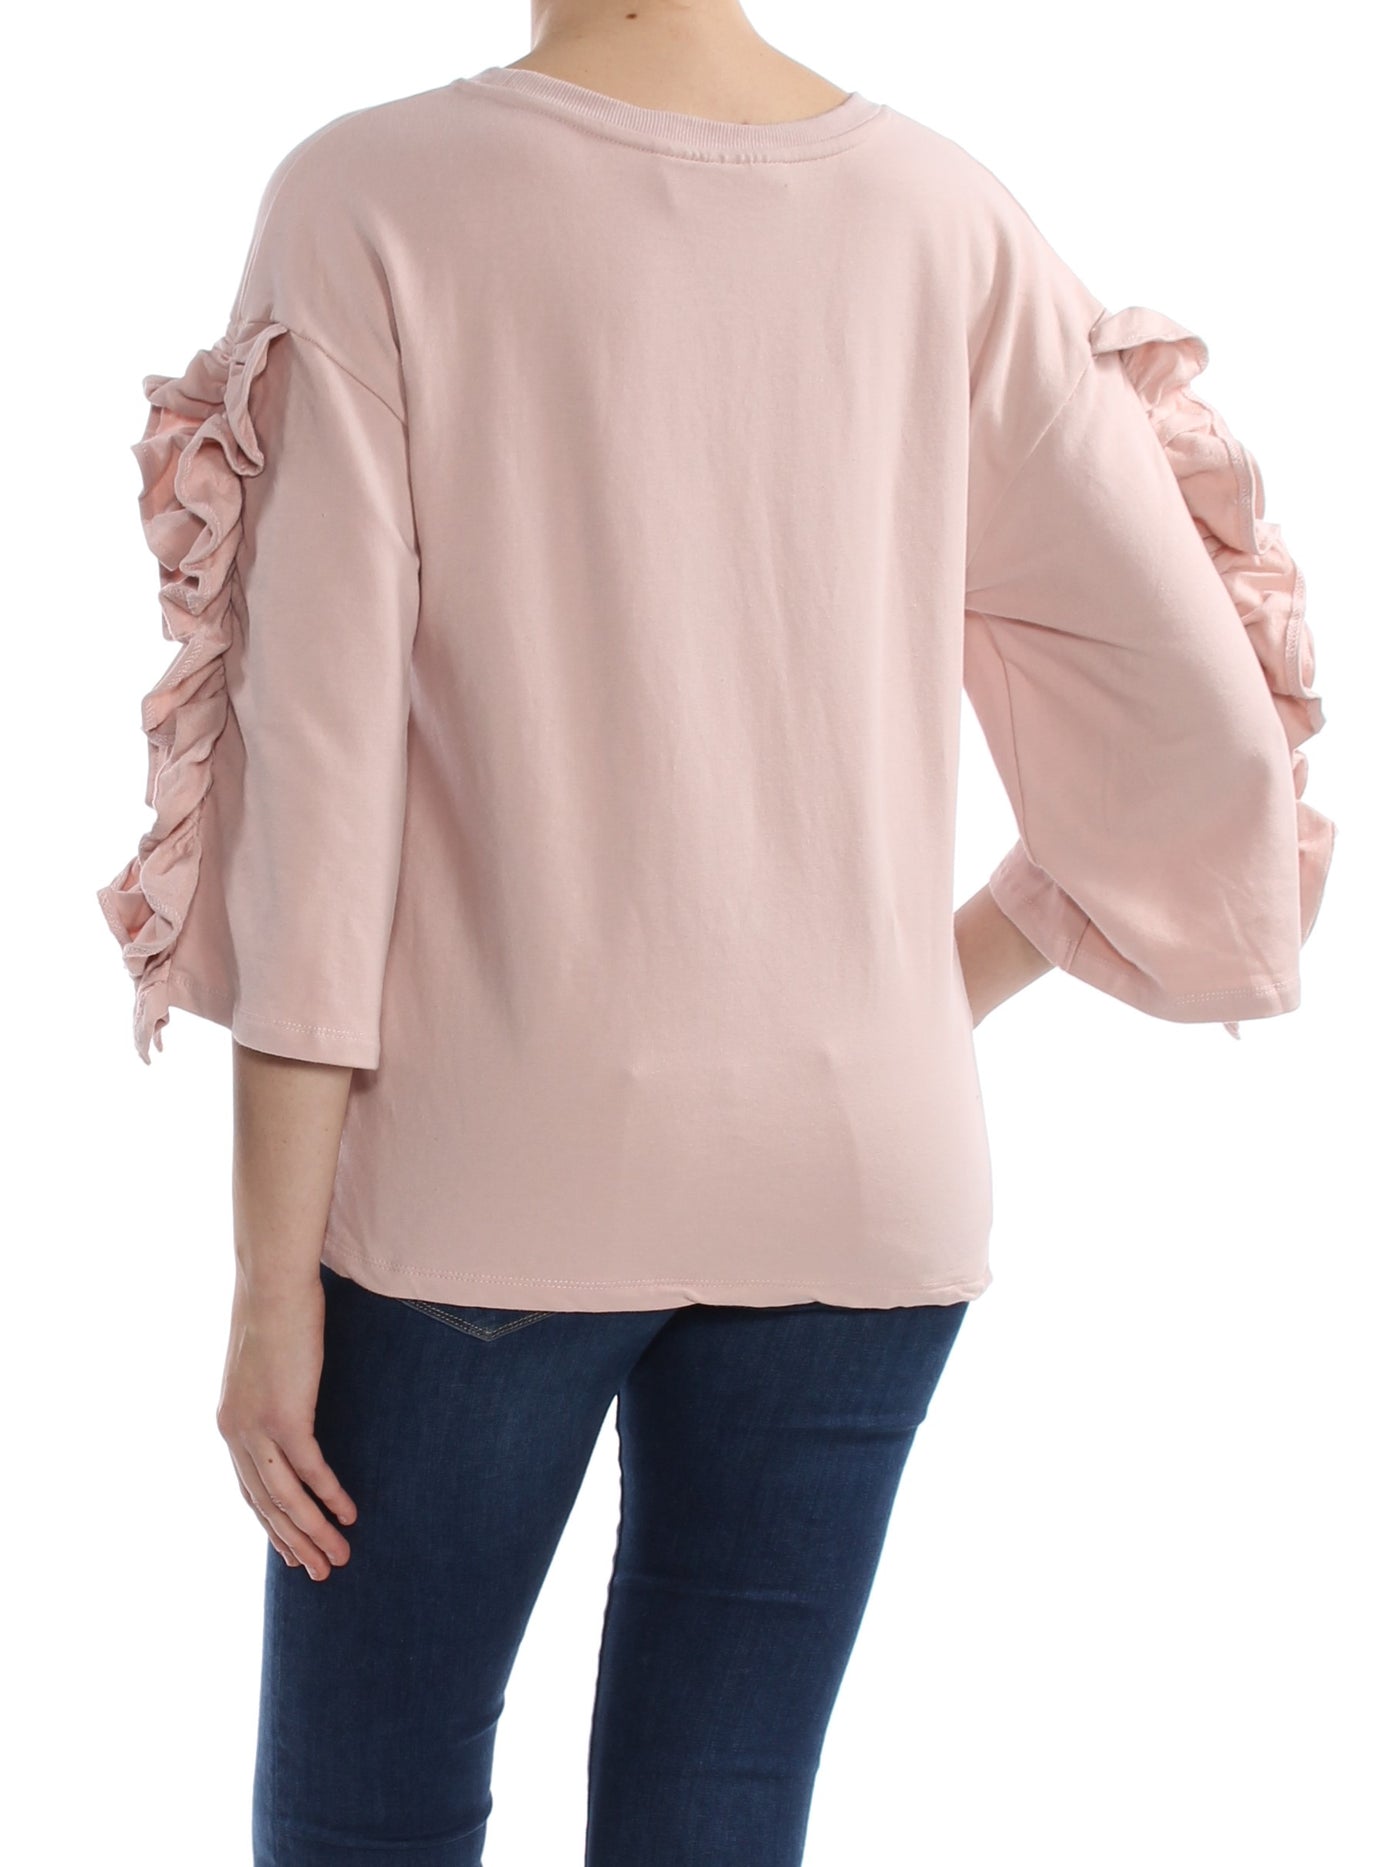 POLLY & ESTHER Womens Pink Ruffled Long Sleeve Jewel Neck Top